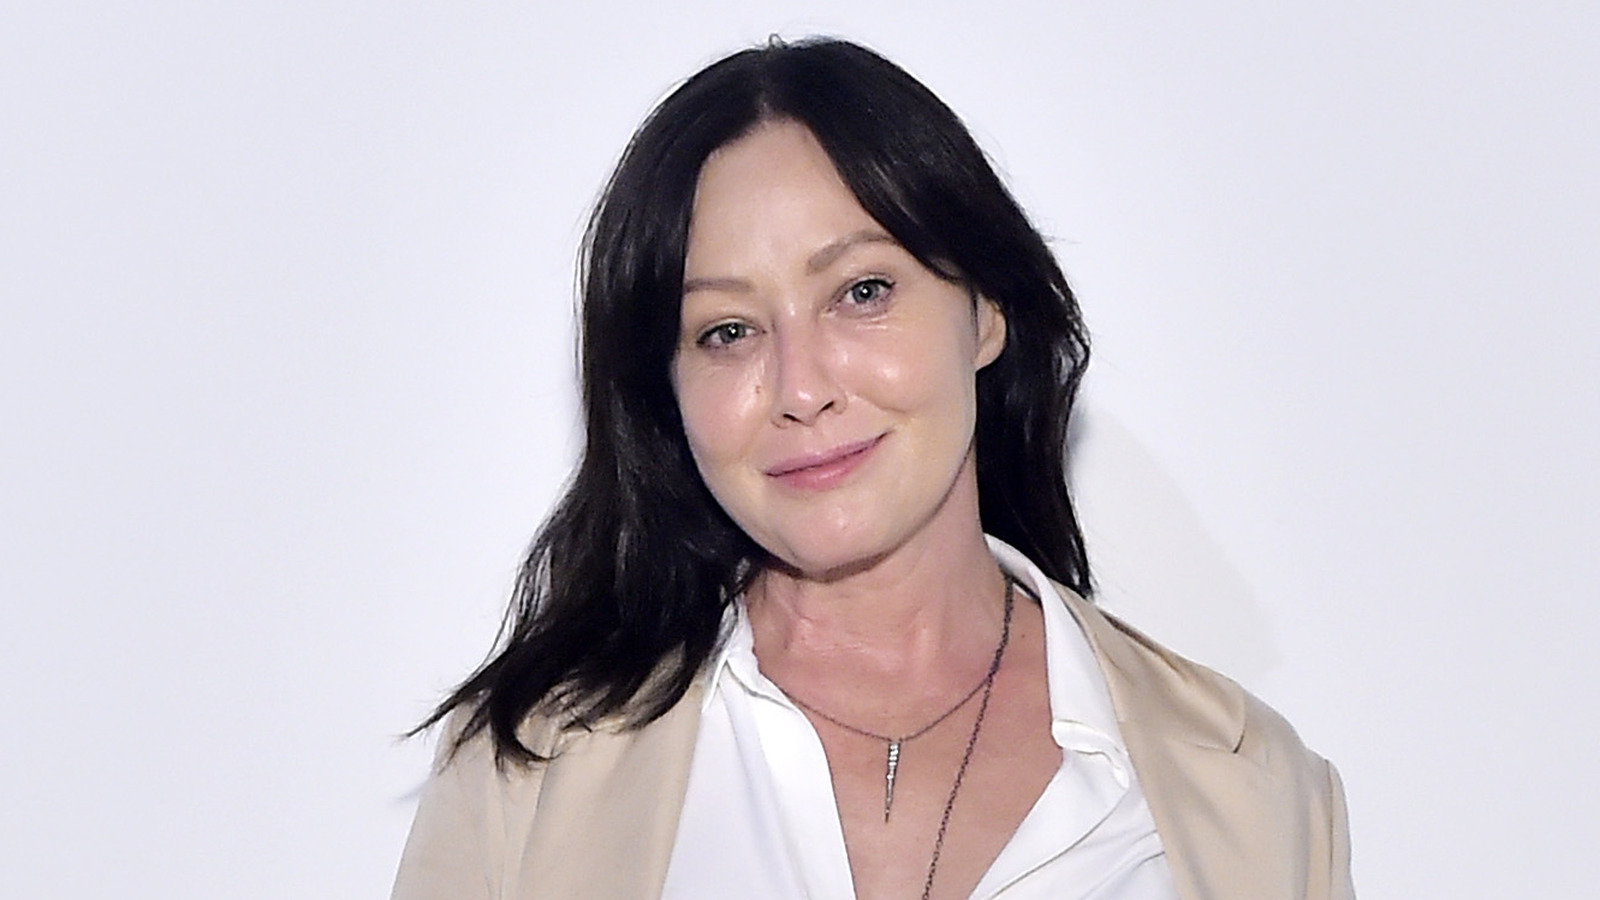 Shannen Doherty Delivers Devastating Most cancers Replace In Weak Look At Remedy